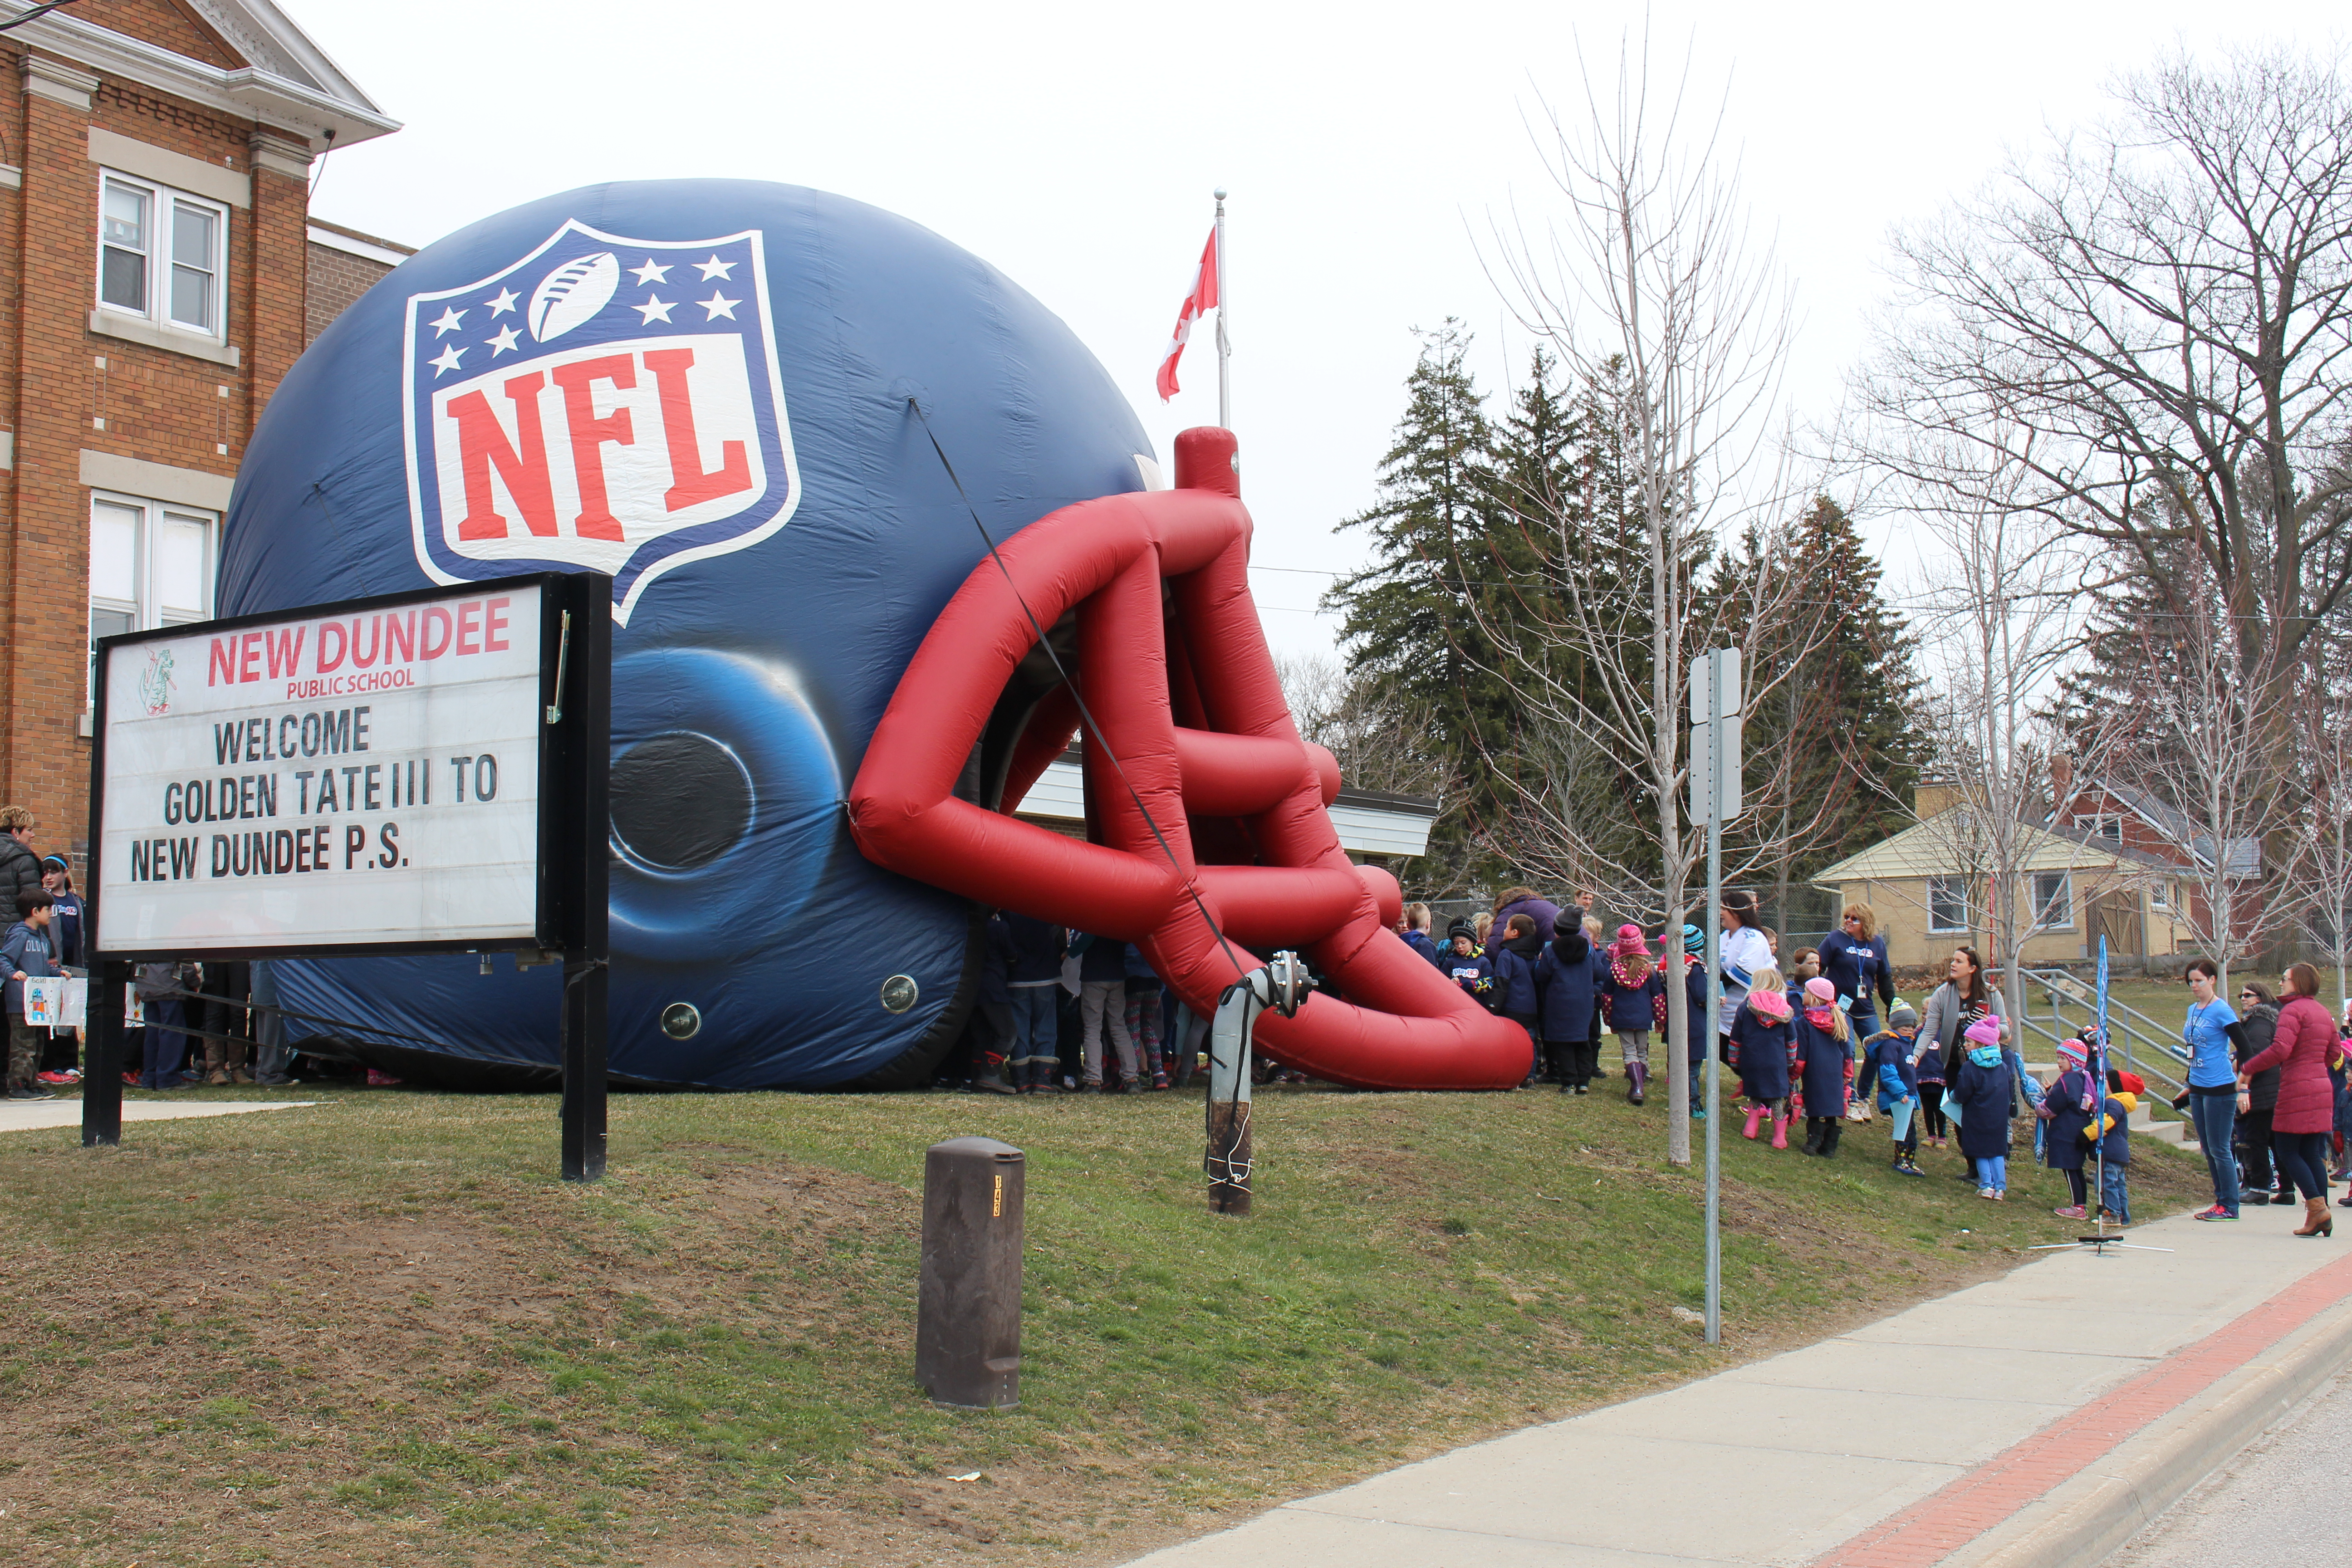 New Dundee PS patiently waits for their special NFL guest! 